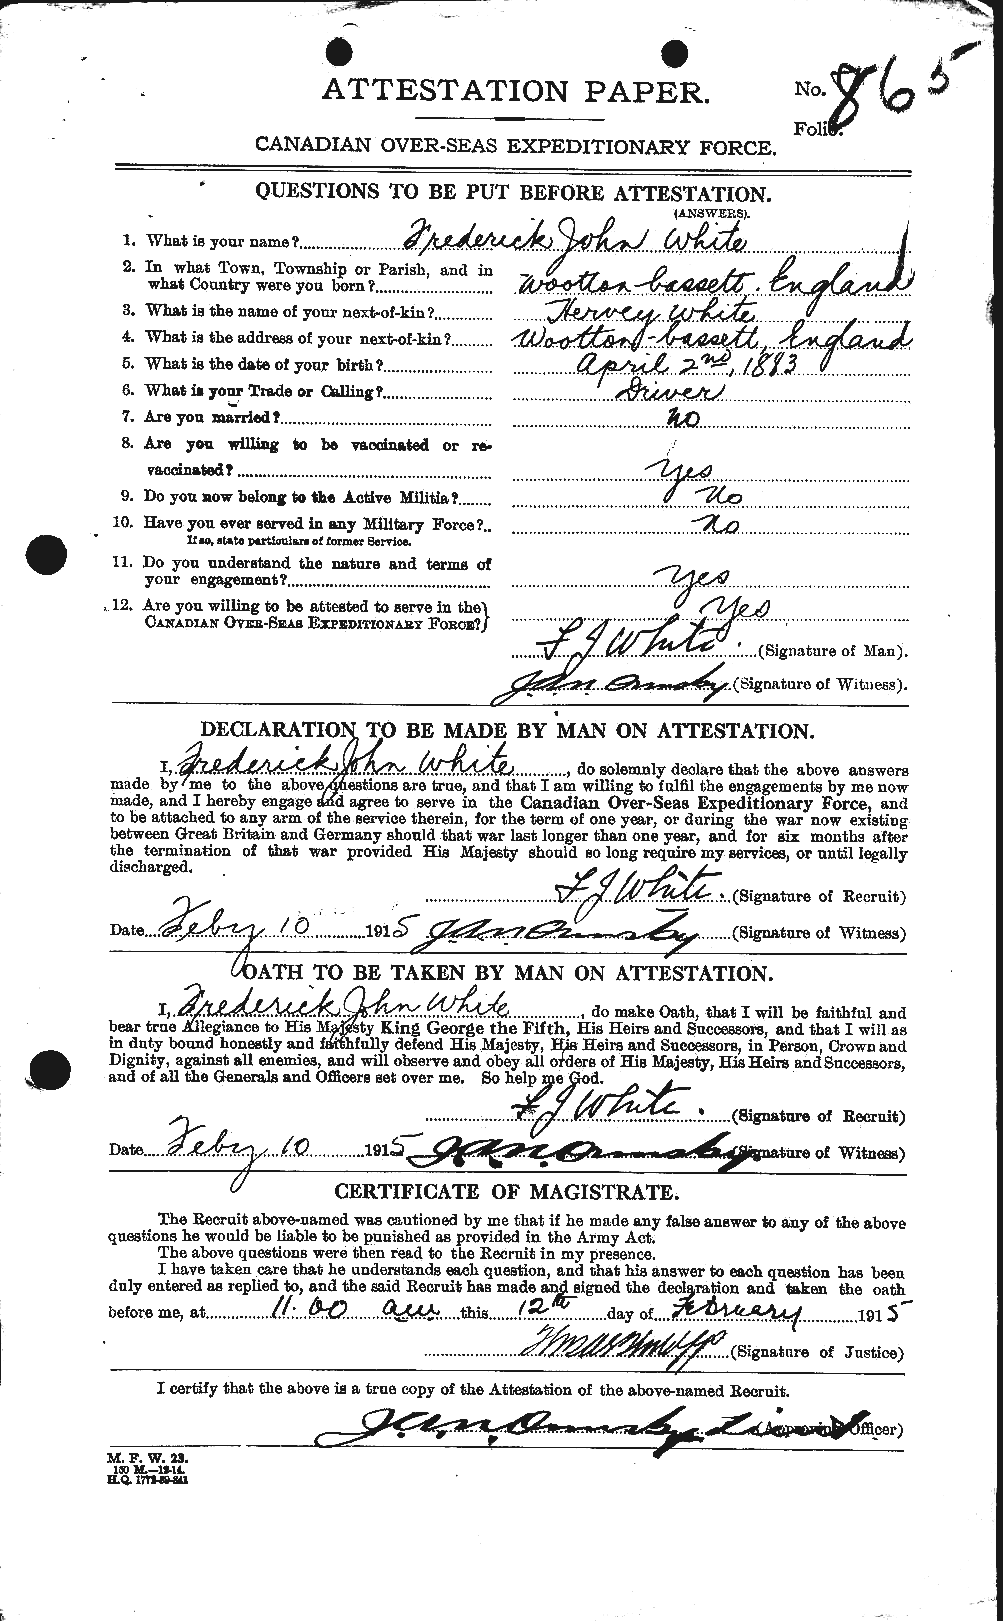 Personnel Records of the First World War - CEF 669417a